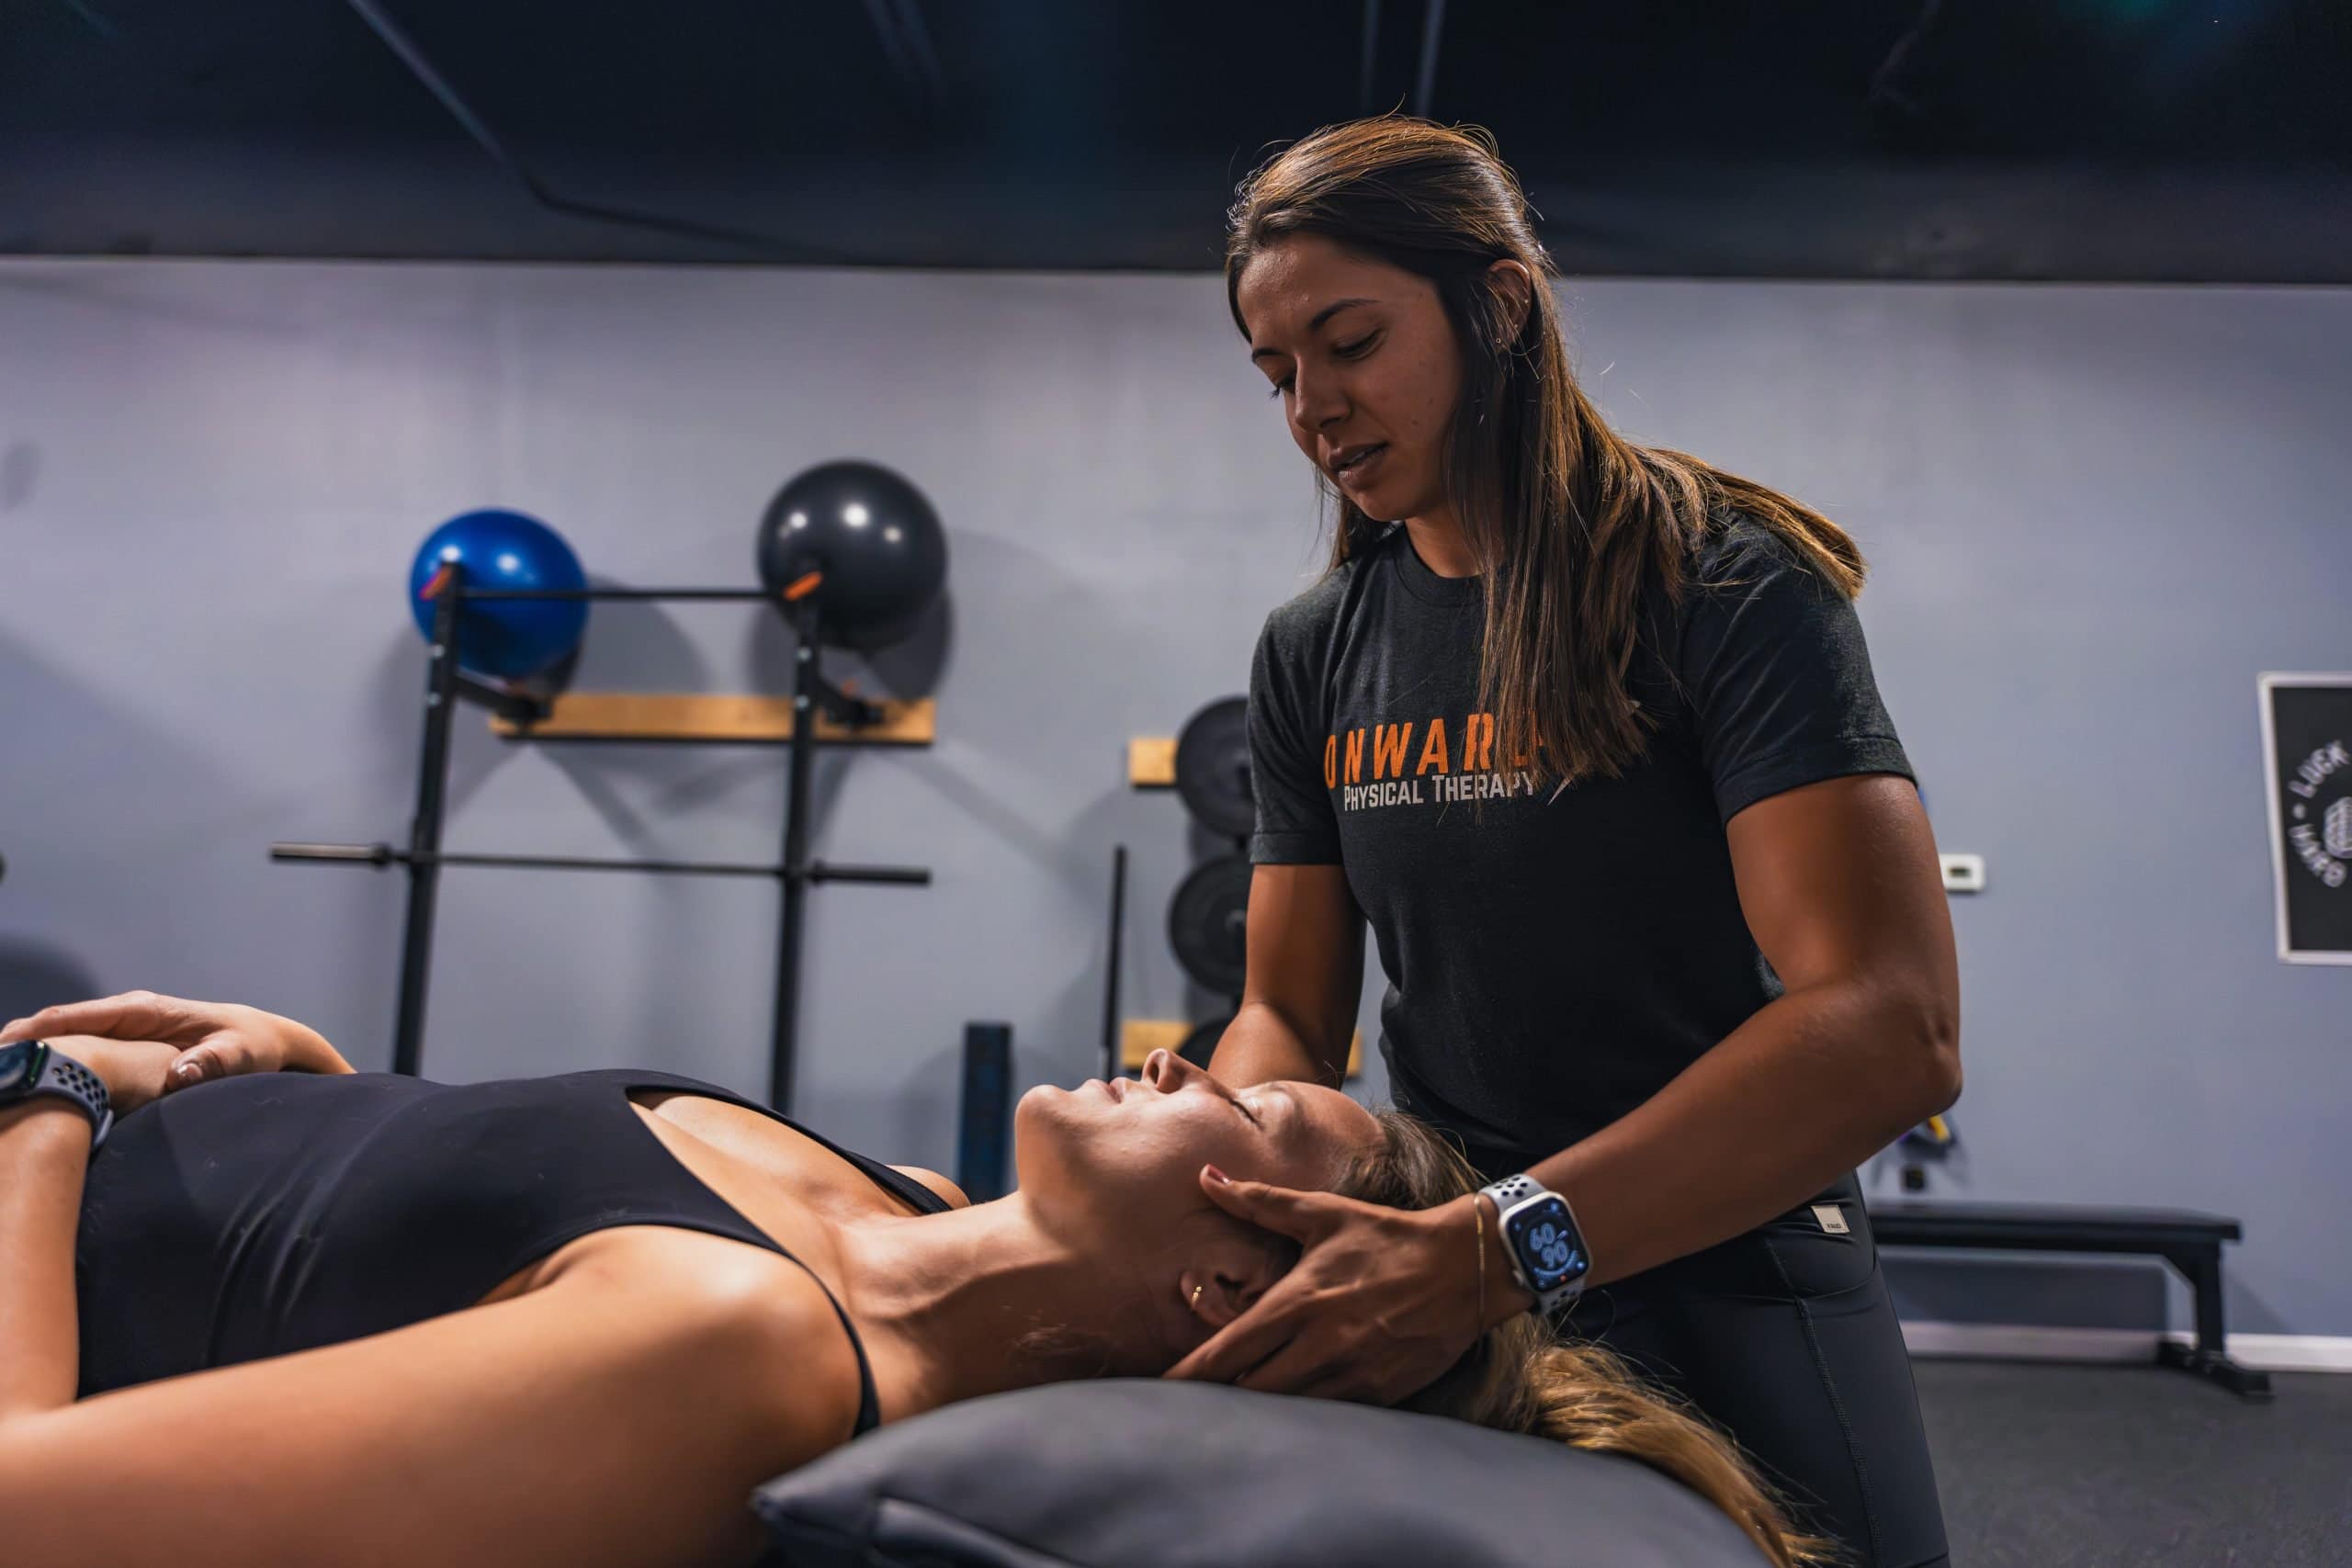 Specialties | Onward Physical Therapy